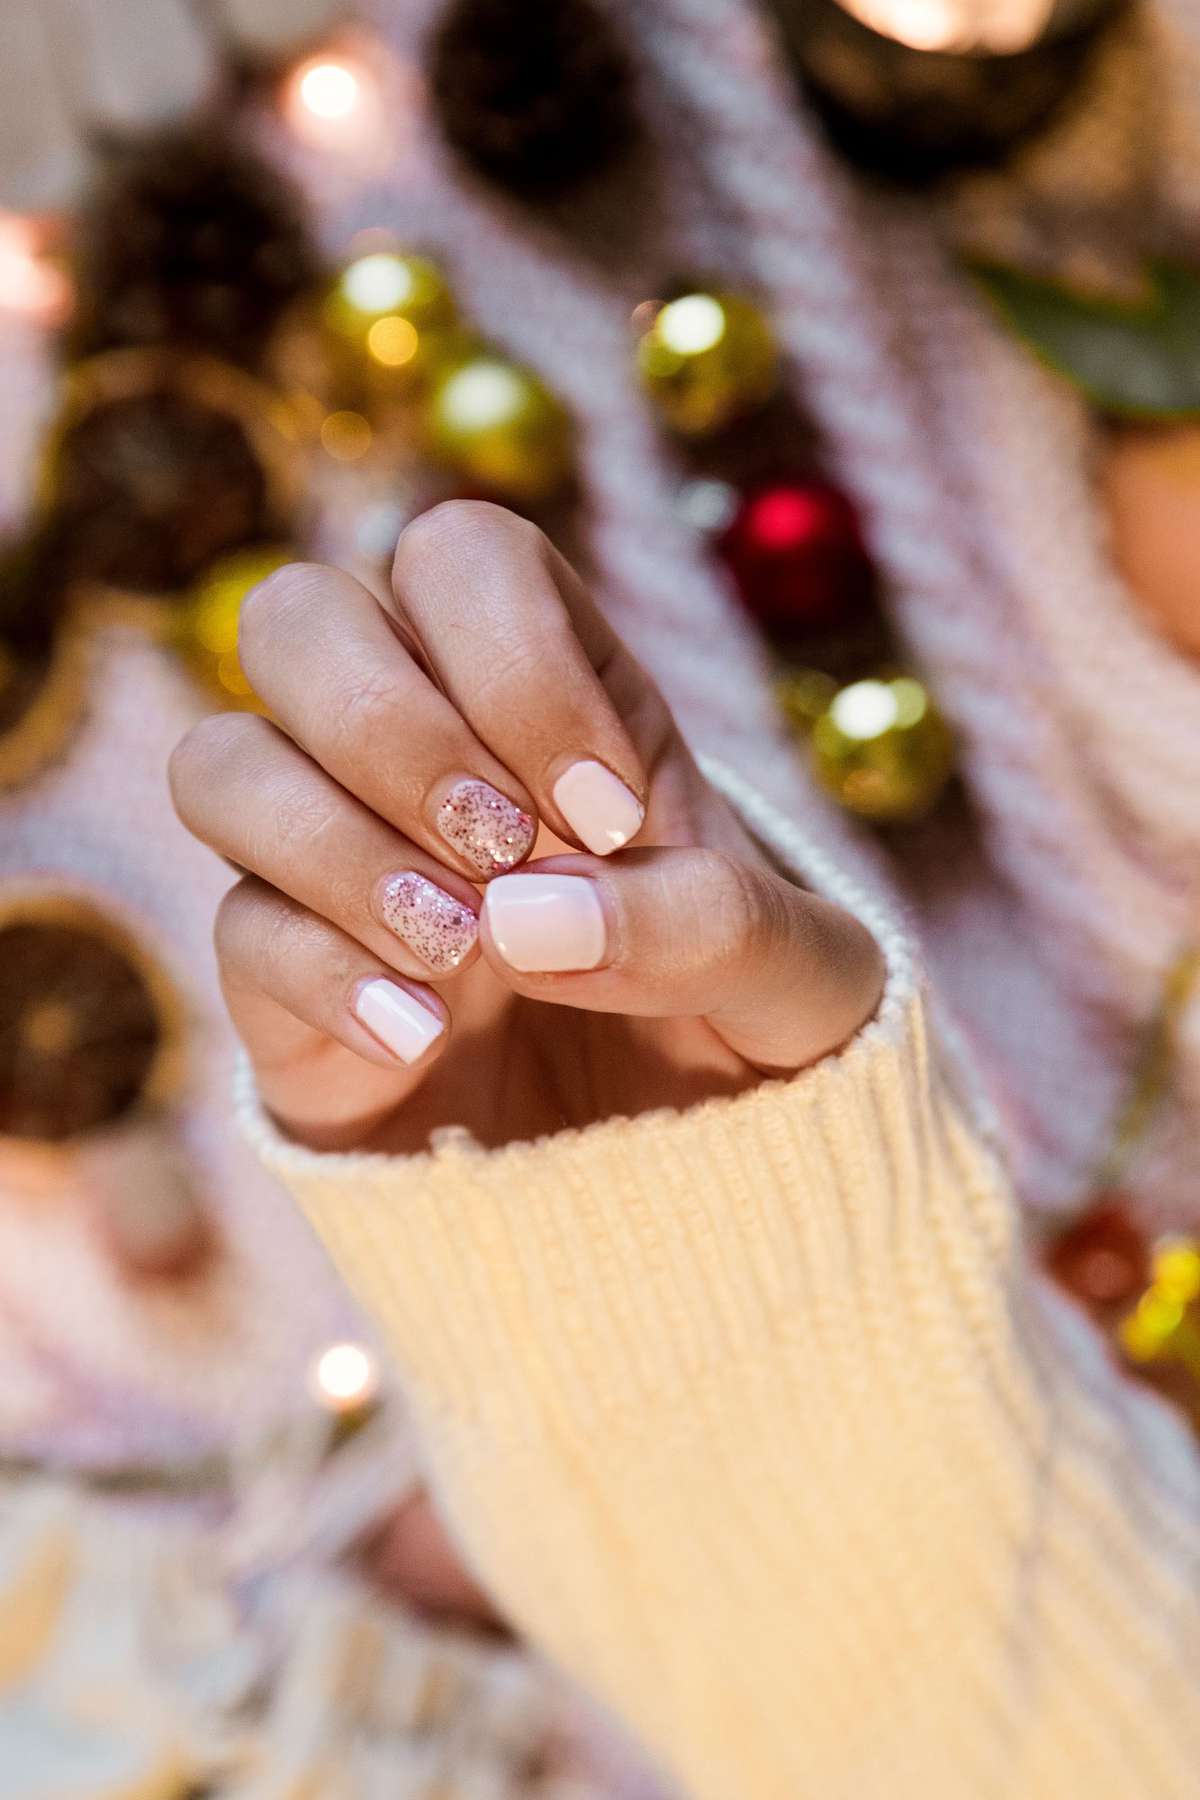 The Holiday Manicure You Should Wear, According to Your Zodiac Sign 